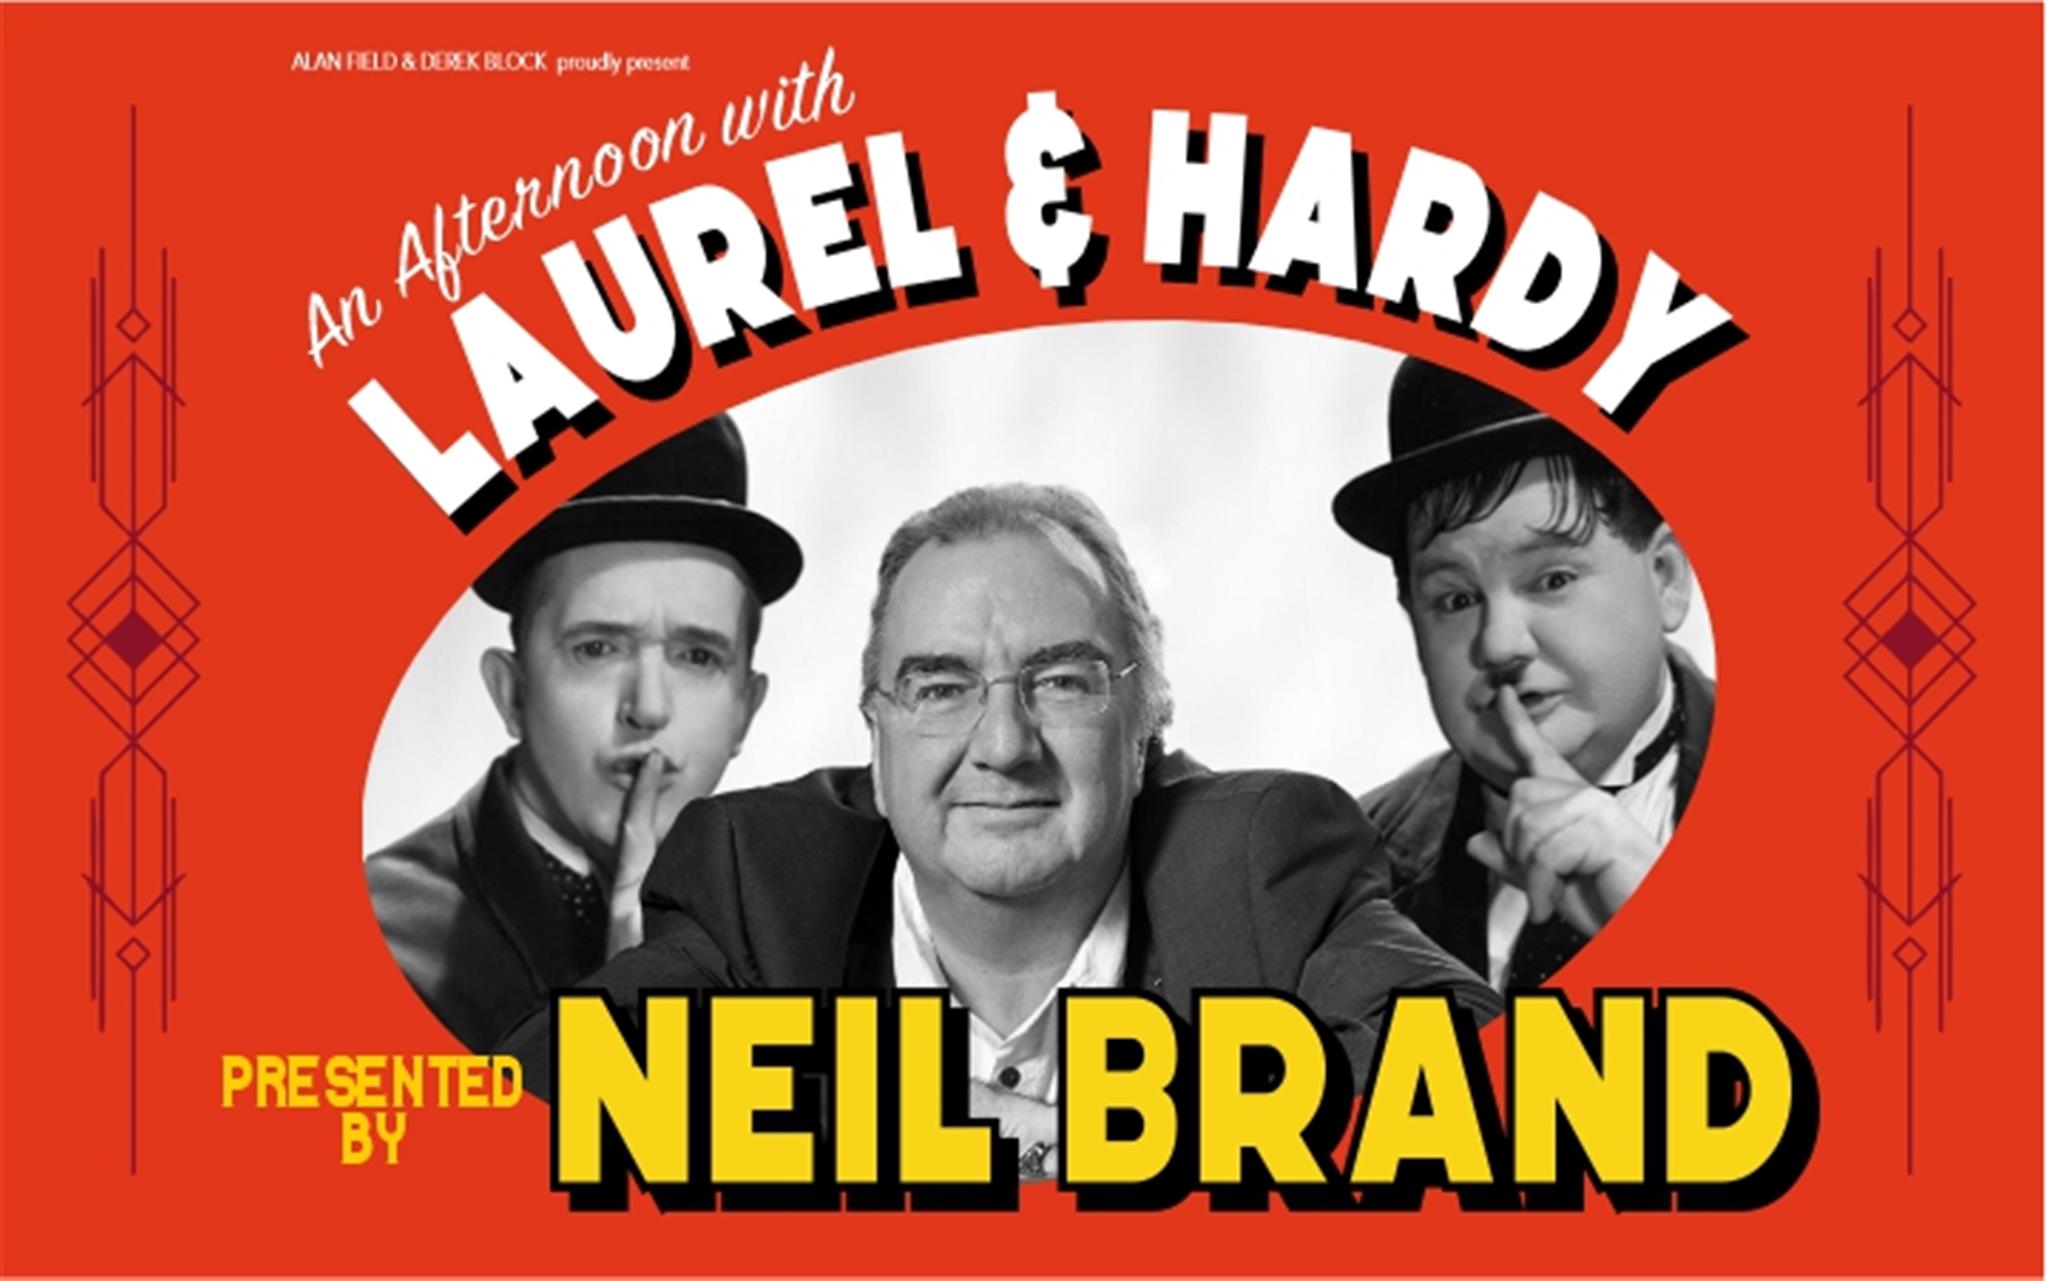 An Afternoon with Laurel & Hardy image